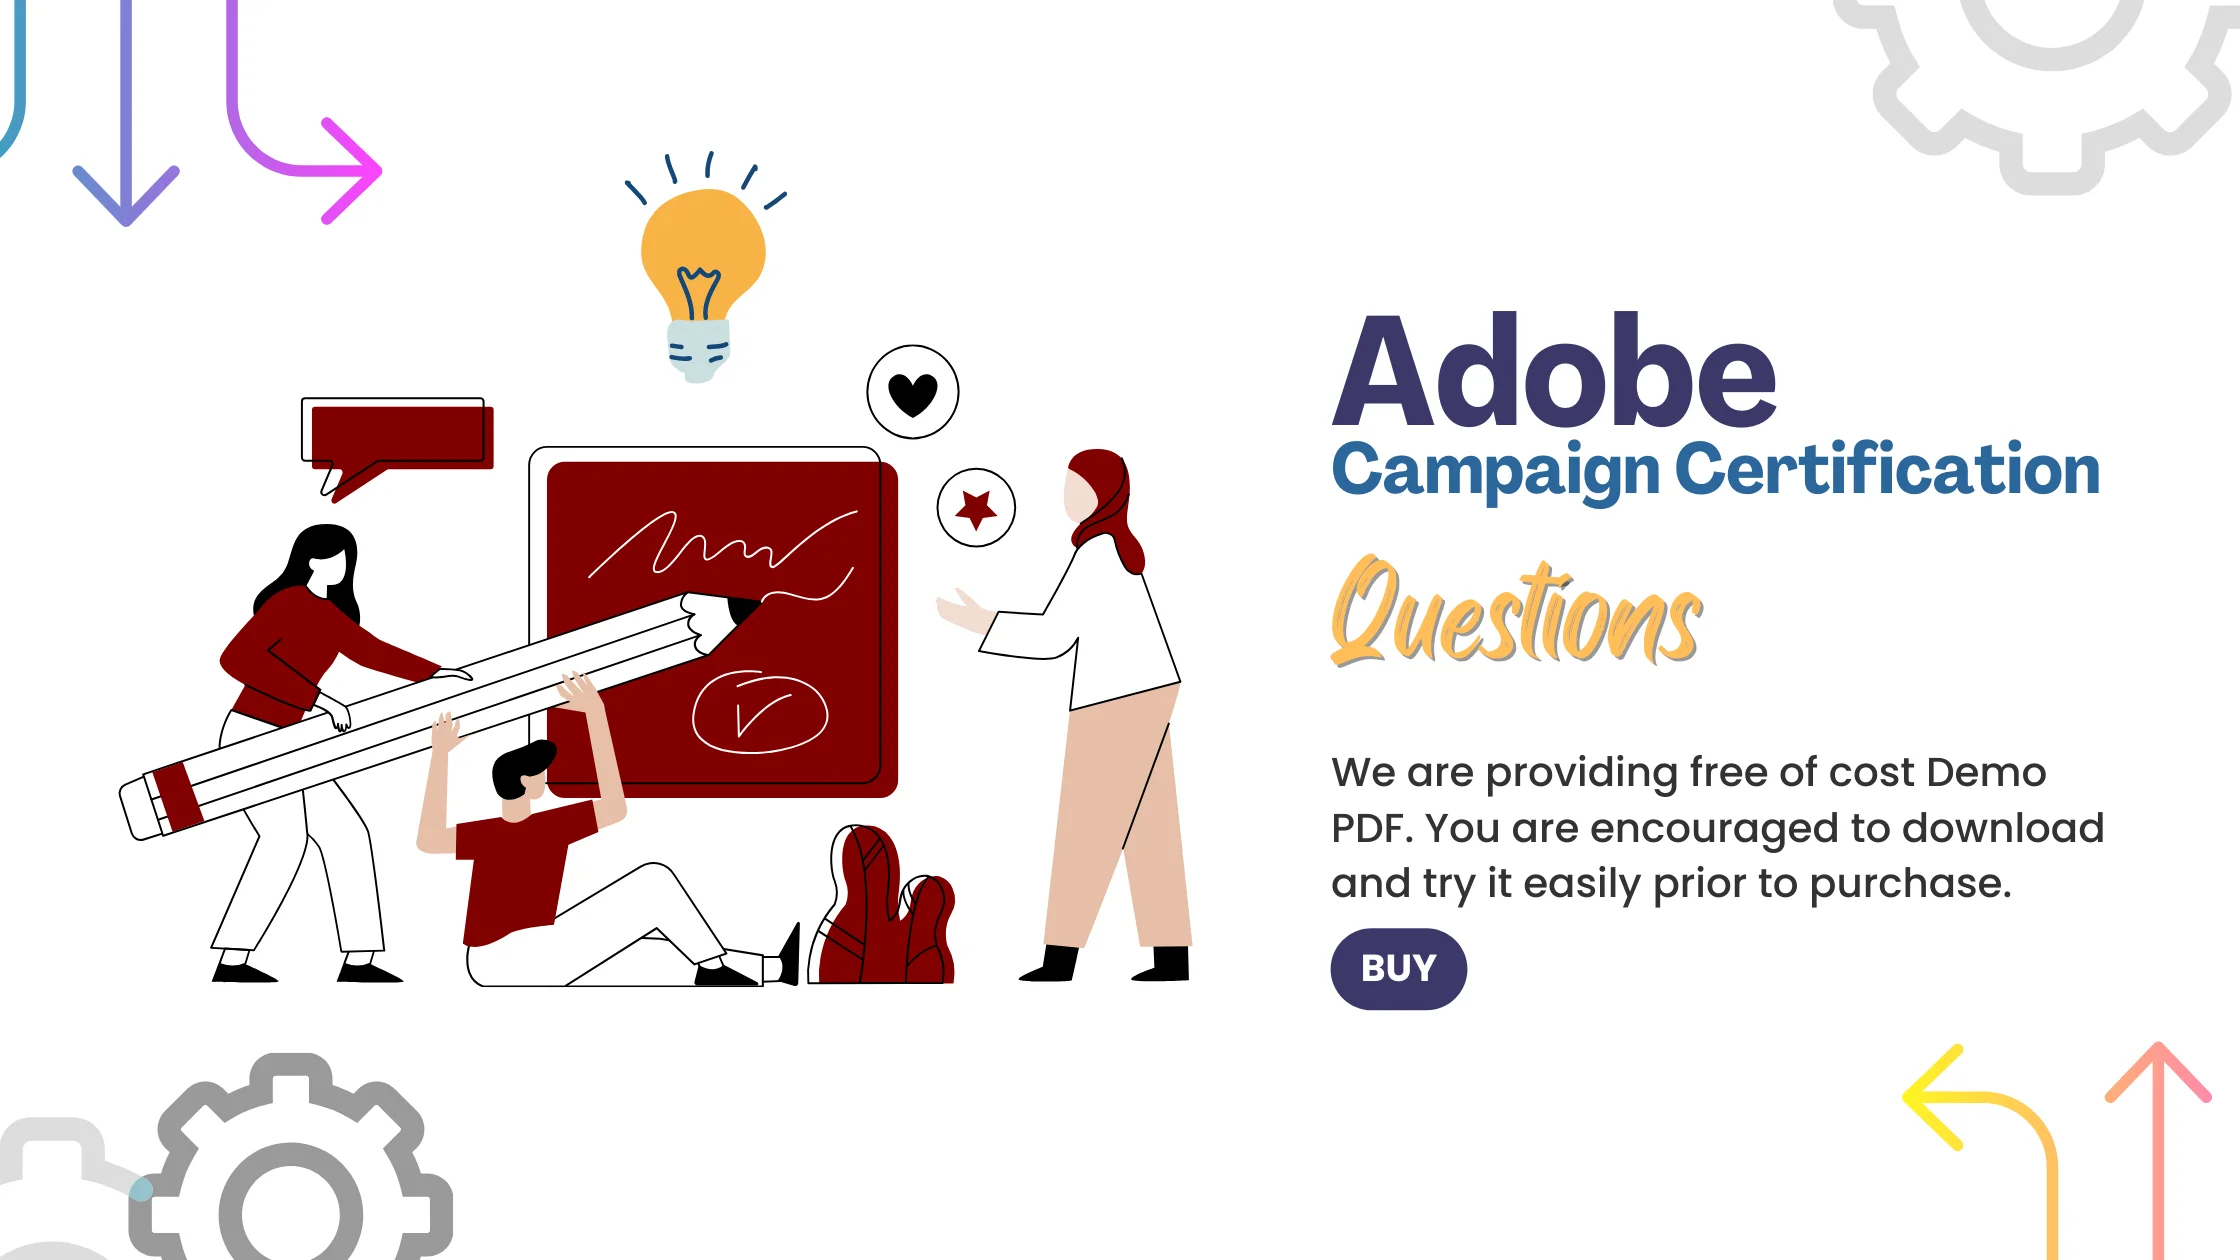 adobe campaign certification questions promotion